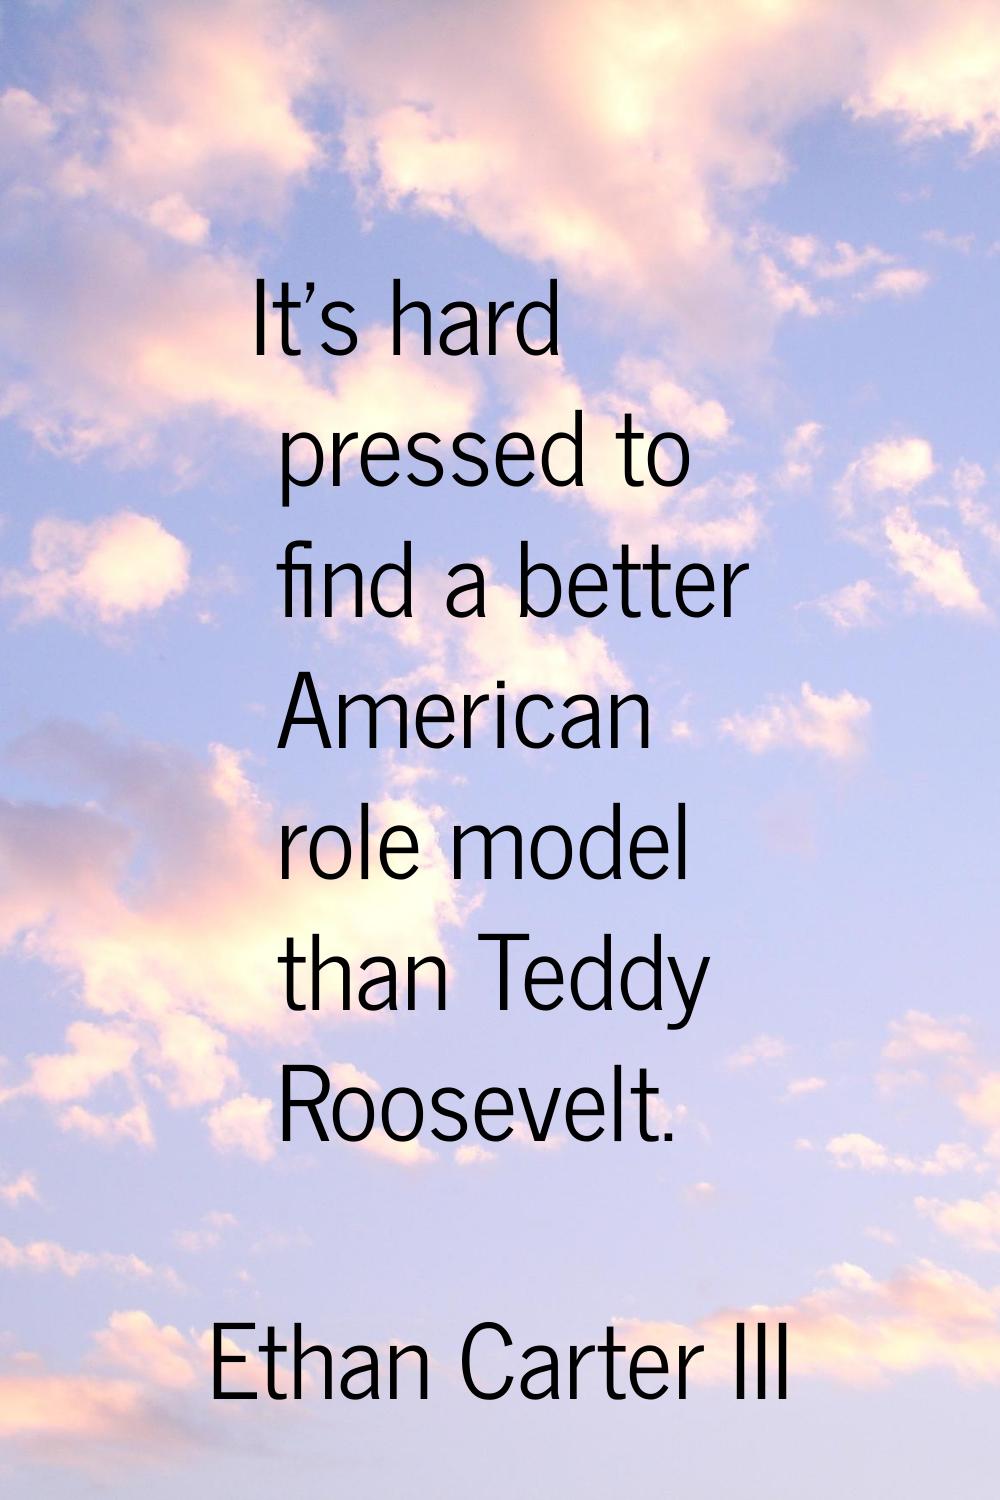 It's hard pressed to find a better American role model than Teddy Roosevelt.